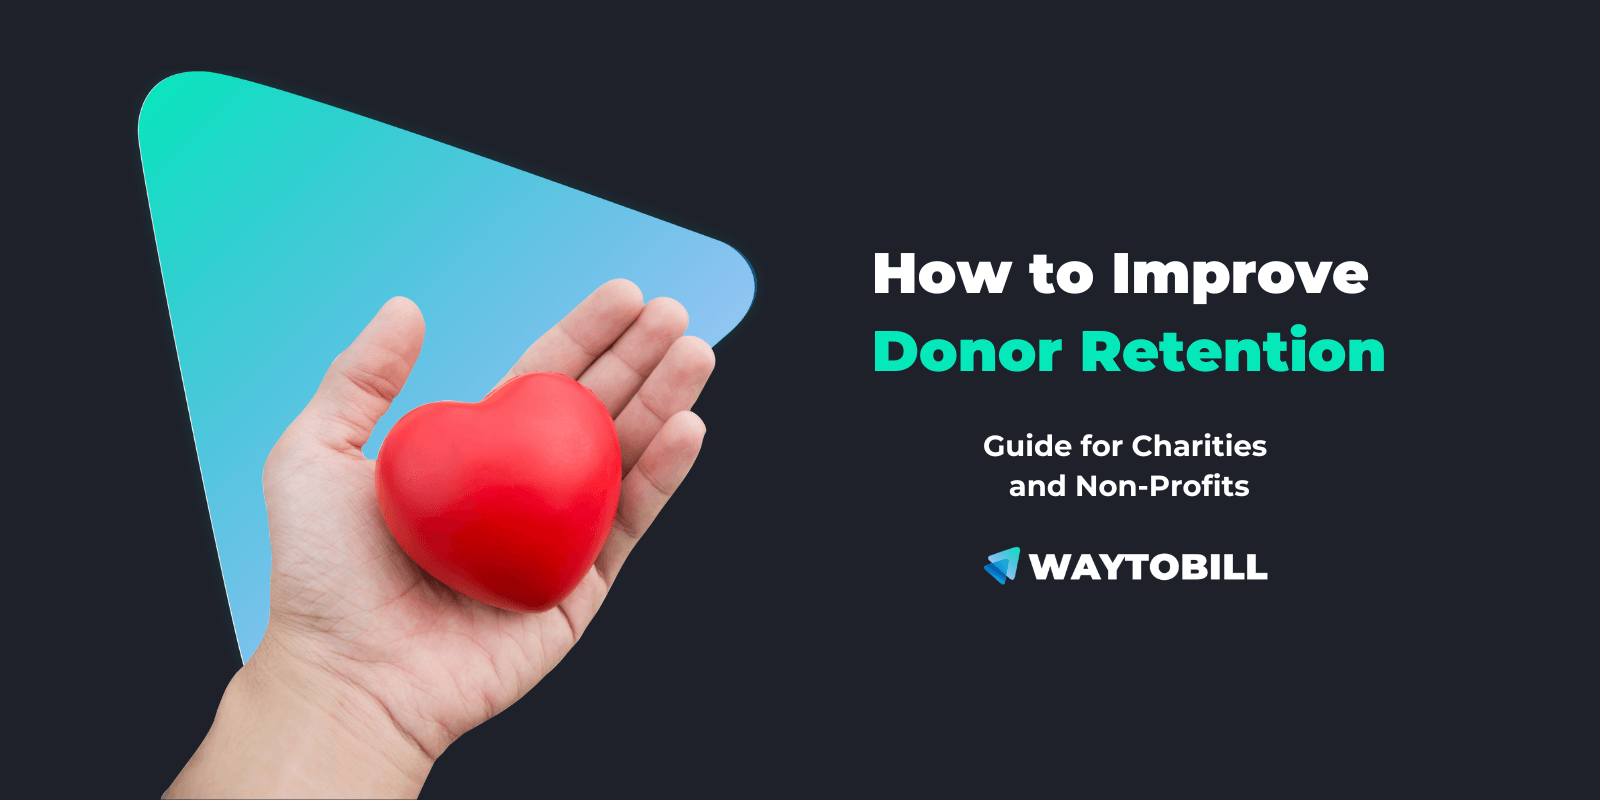 How to Improve Donor Retention: 8 Steps for Charities & Non-Profits